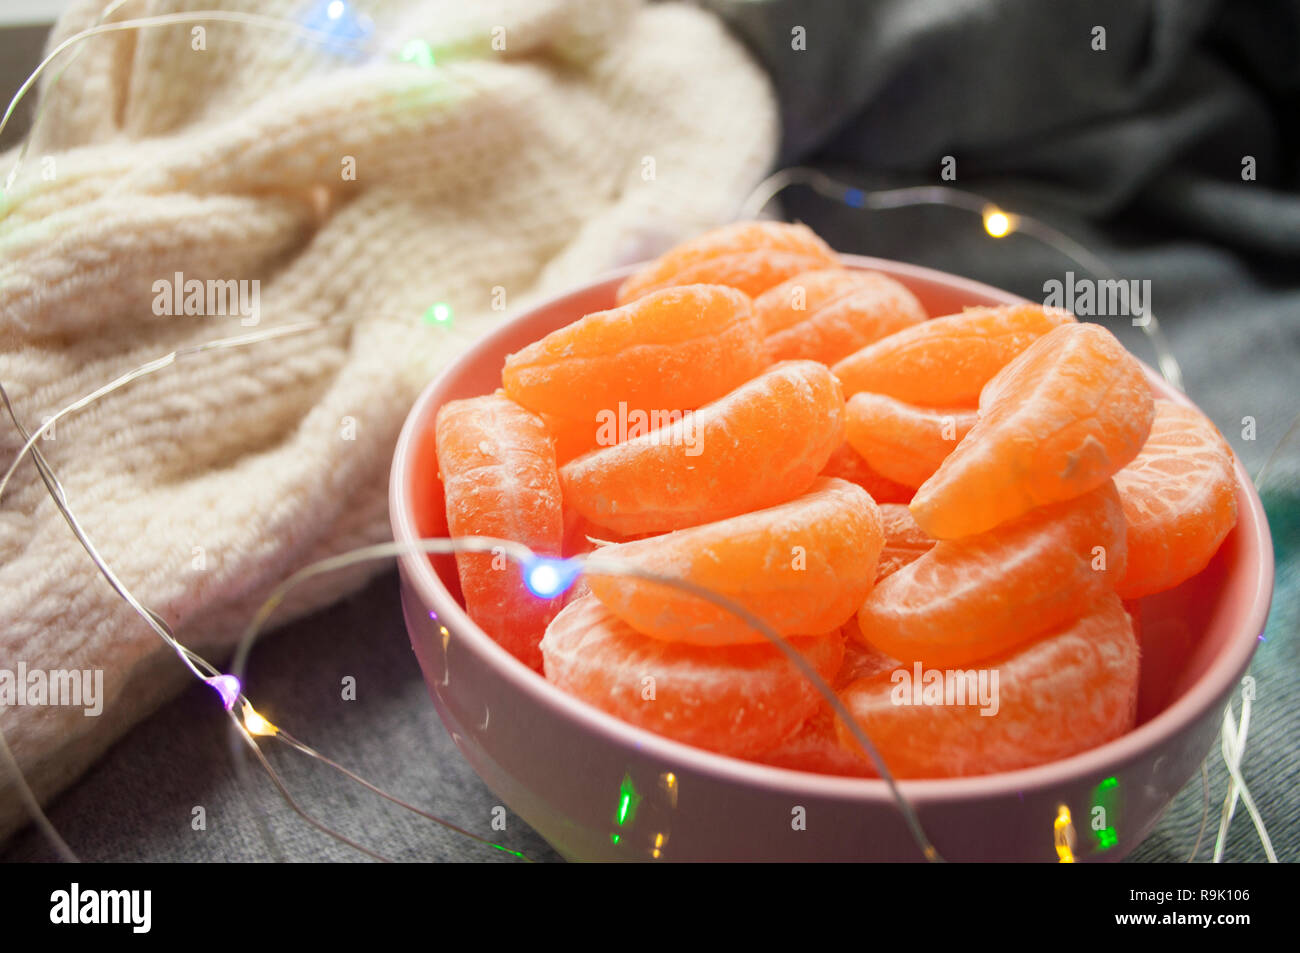 Pink bowl full of peeled sweet tangerines on grey background with garland lights. Stock Photo